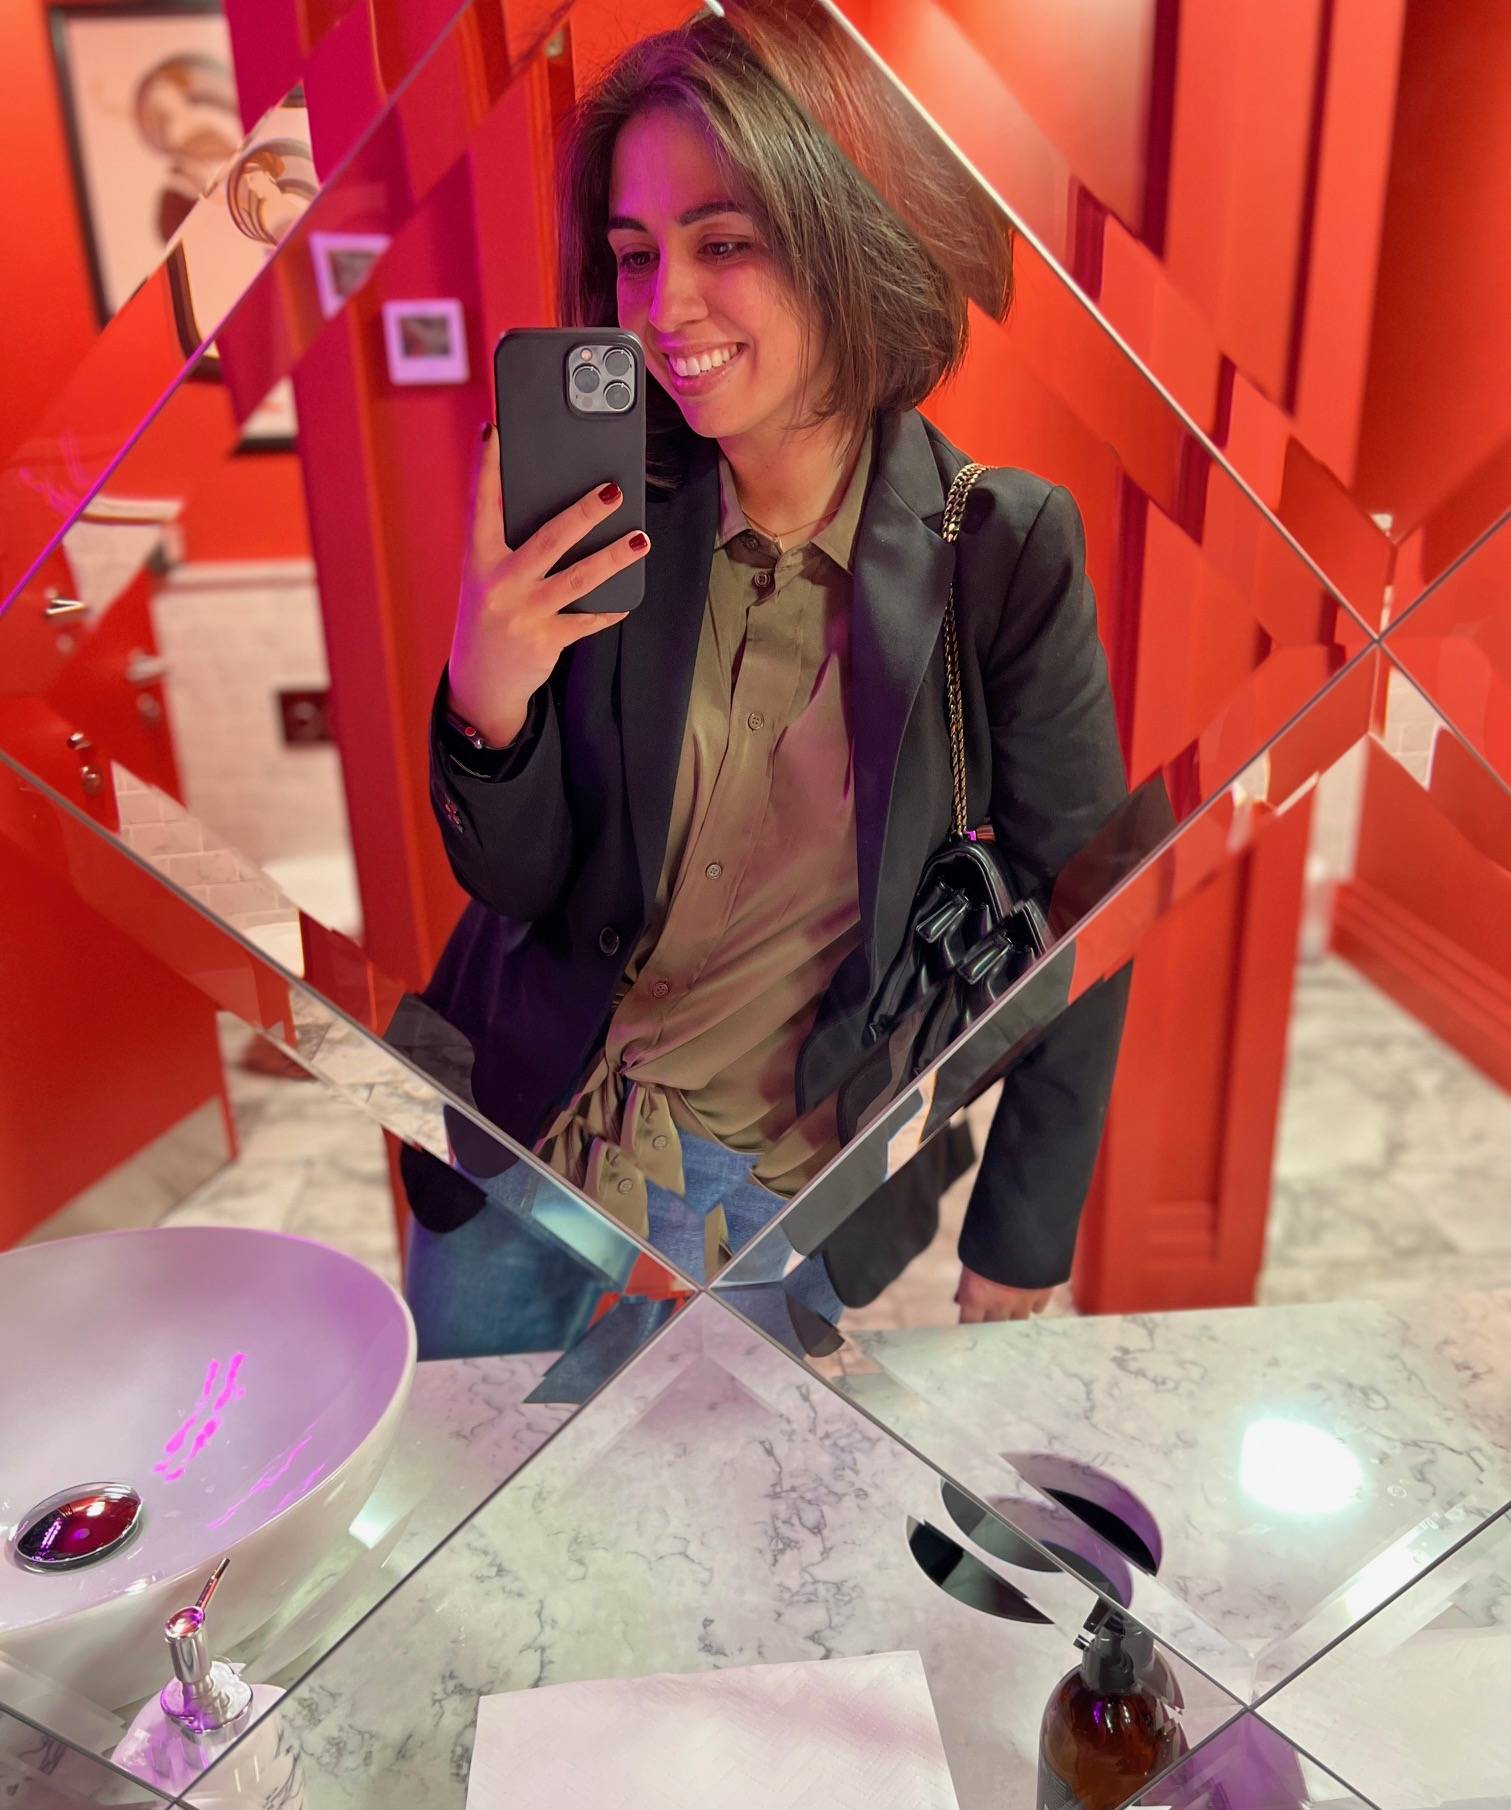 Woman holding a phone talking a photo in a mirror